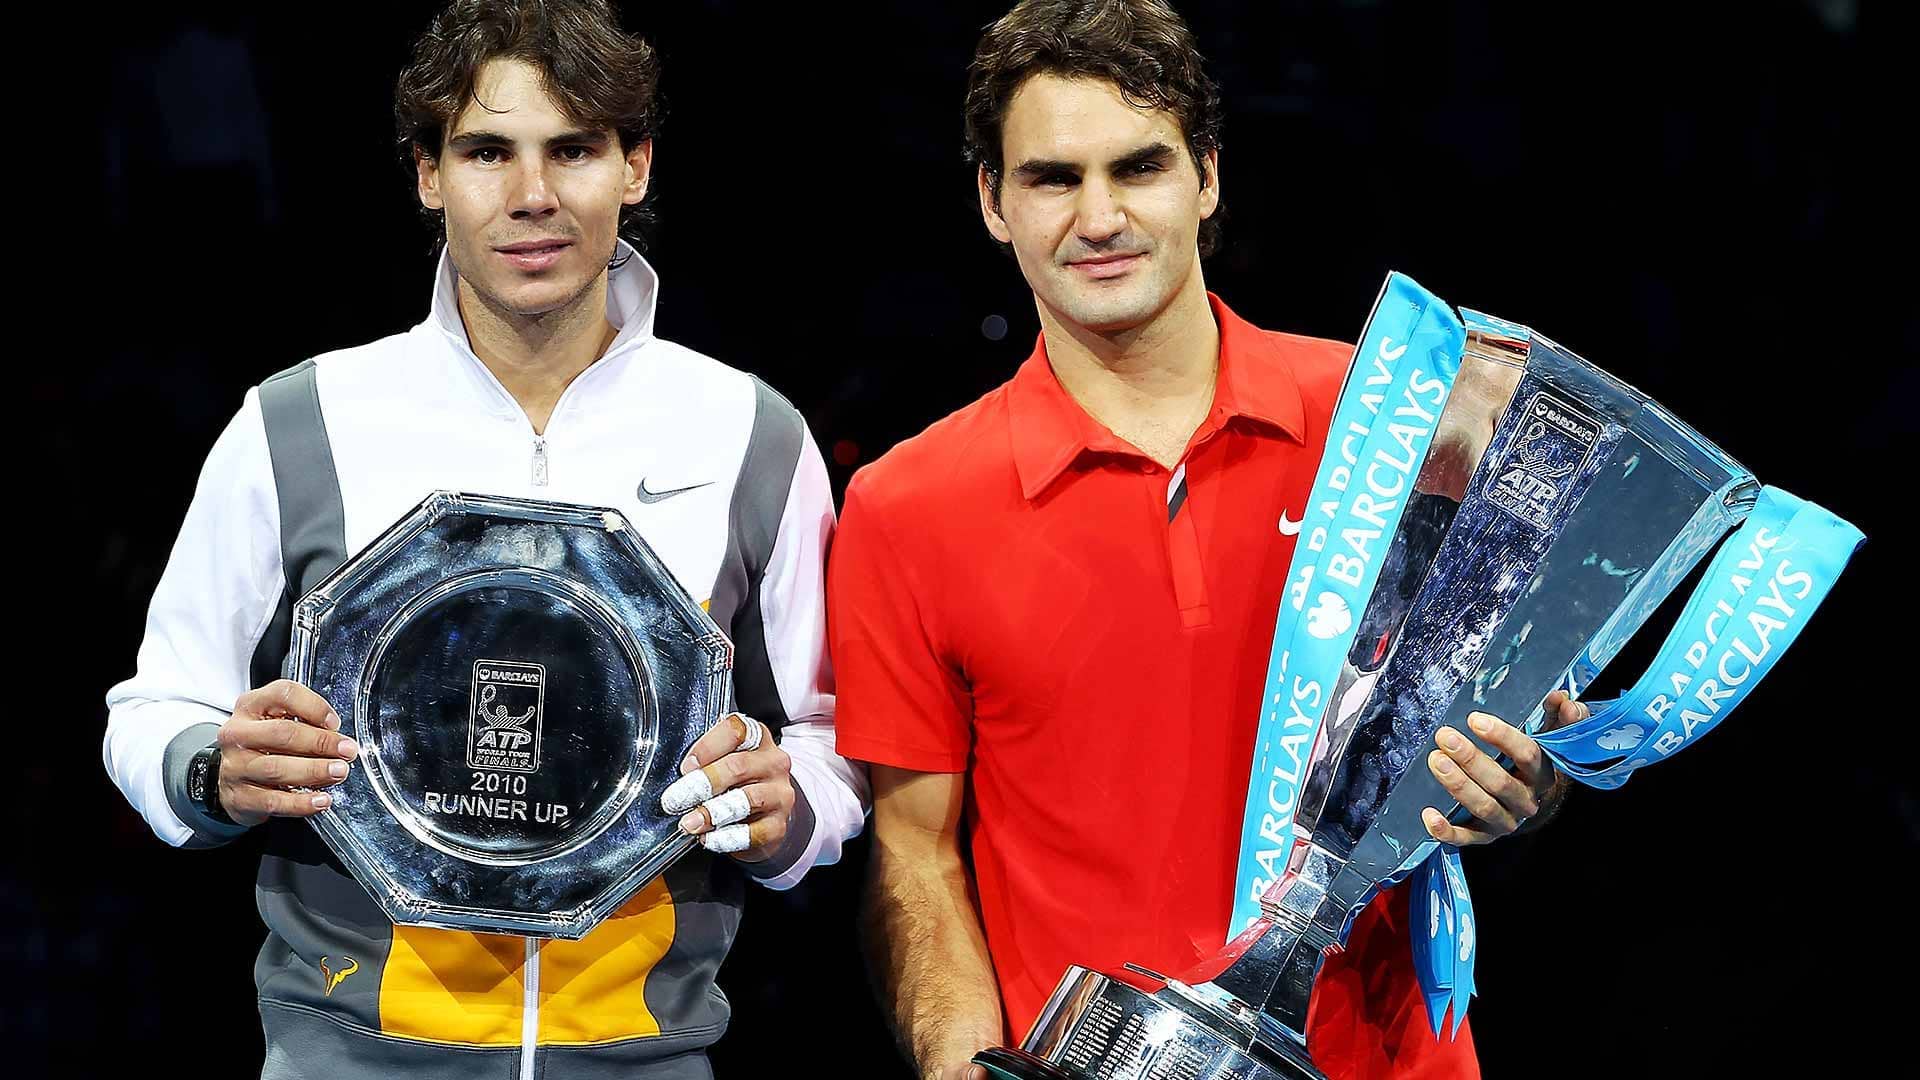 Rafael Nadal and Roger Federer conclude the 2010 season by meeting in the championship match of the Barclays ATP World Tour Finals.